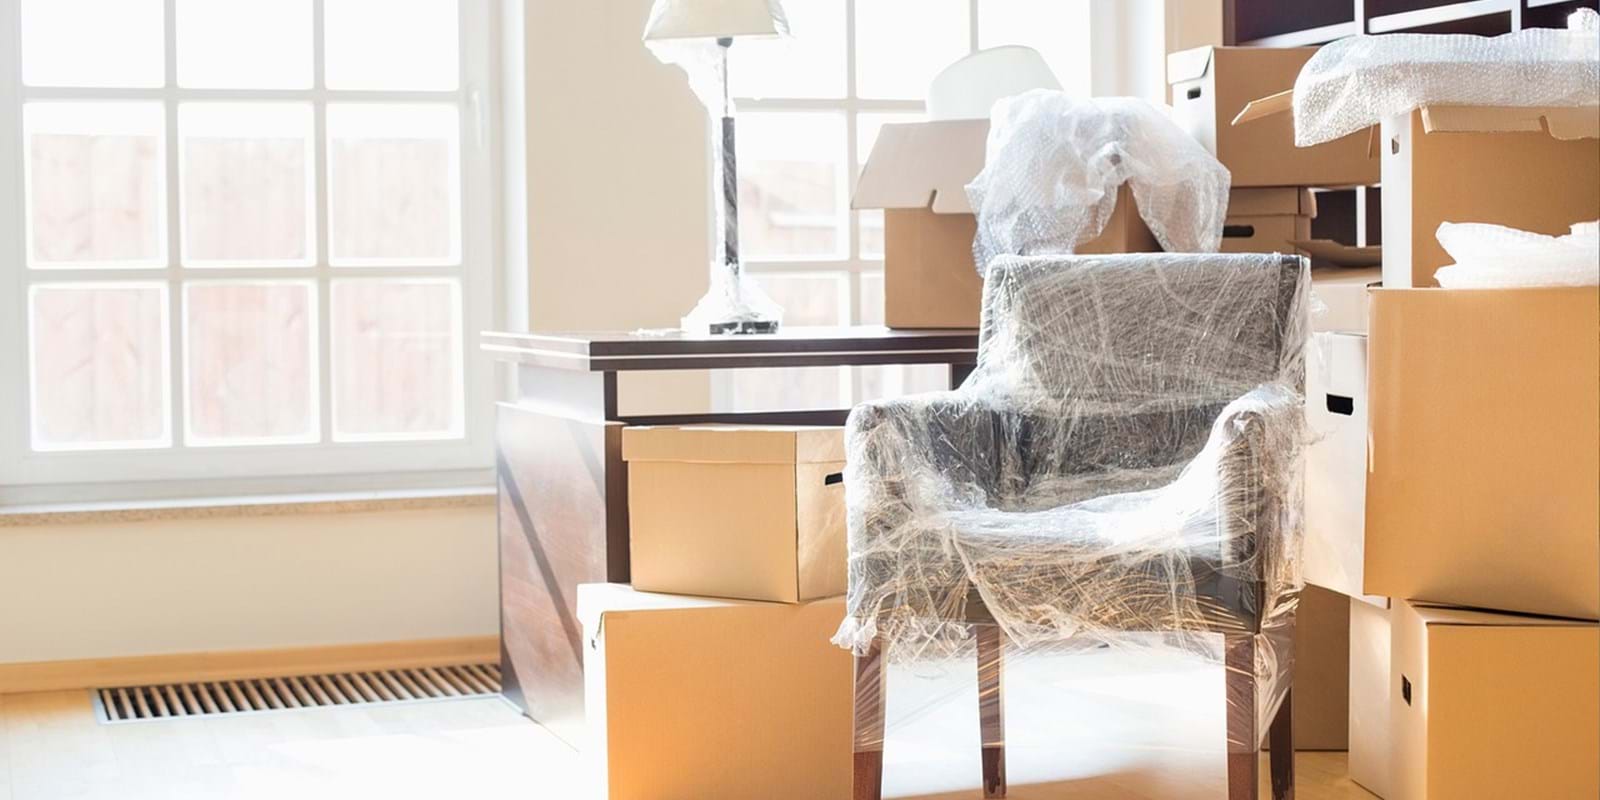 When a tenant moves out, what should a landlord look out for?